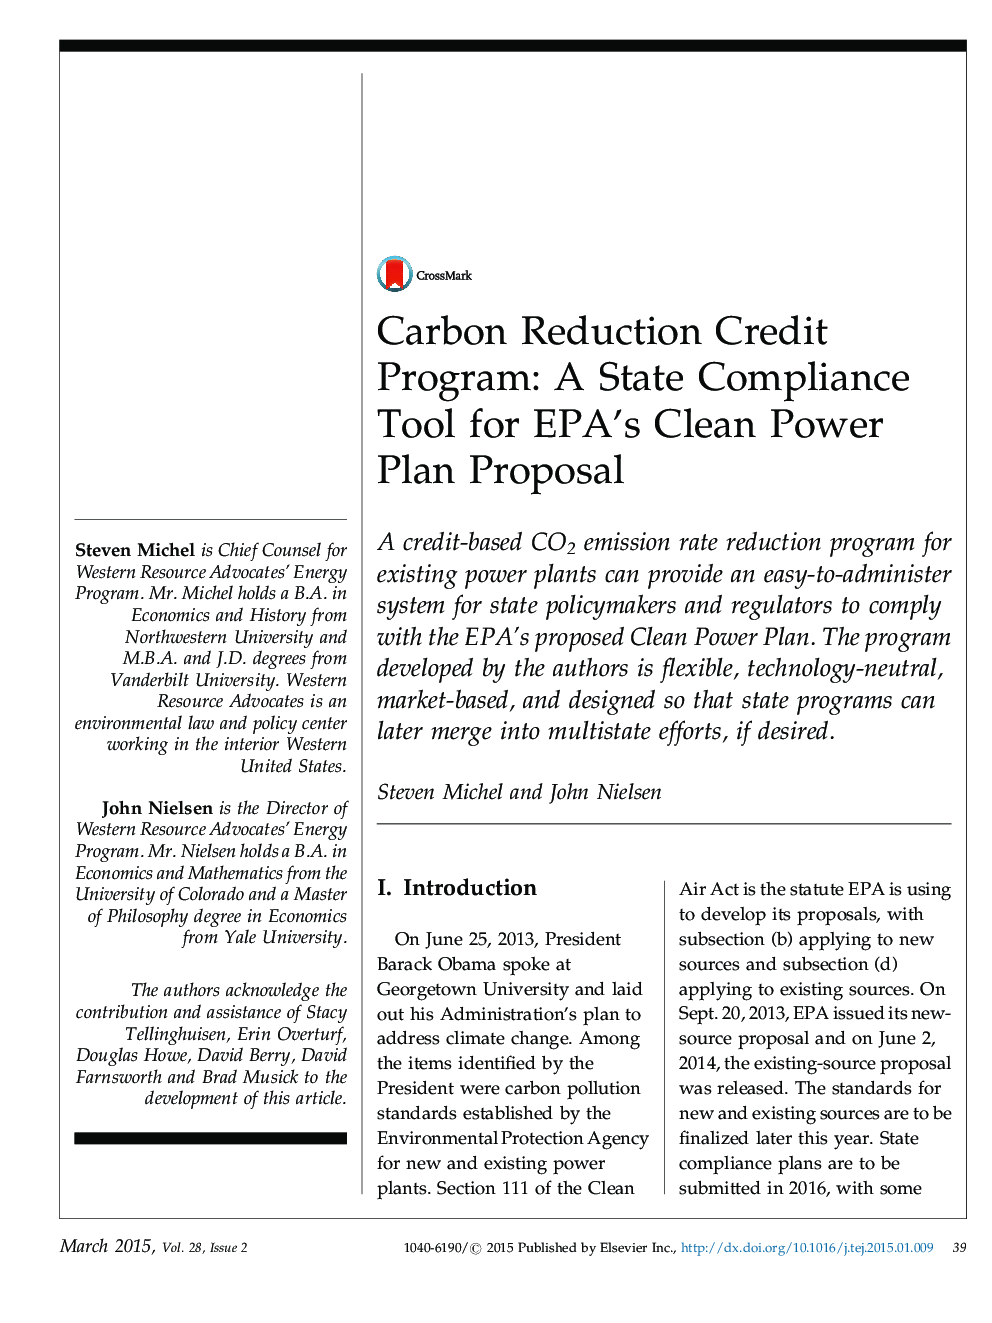 Carbon Reduction Credit Program: A State Compliance Tool for EPA's Clean Power Plan Proposal